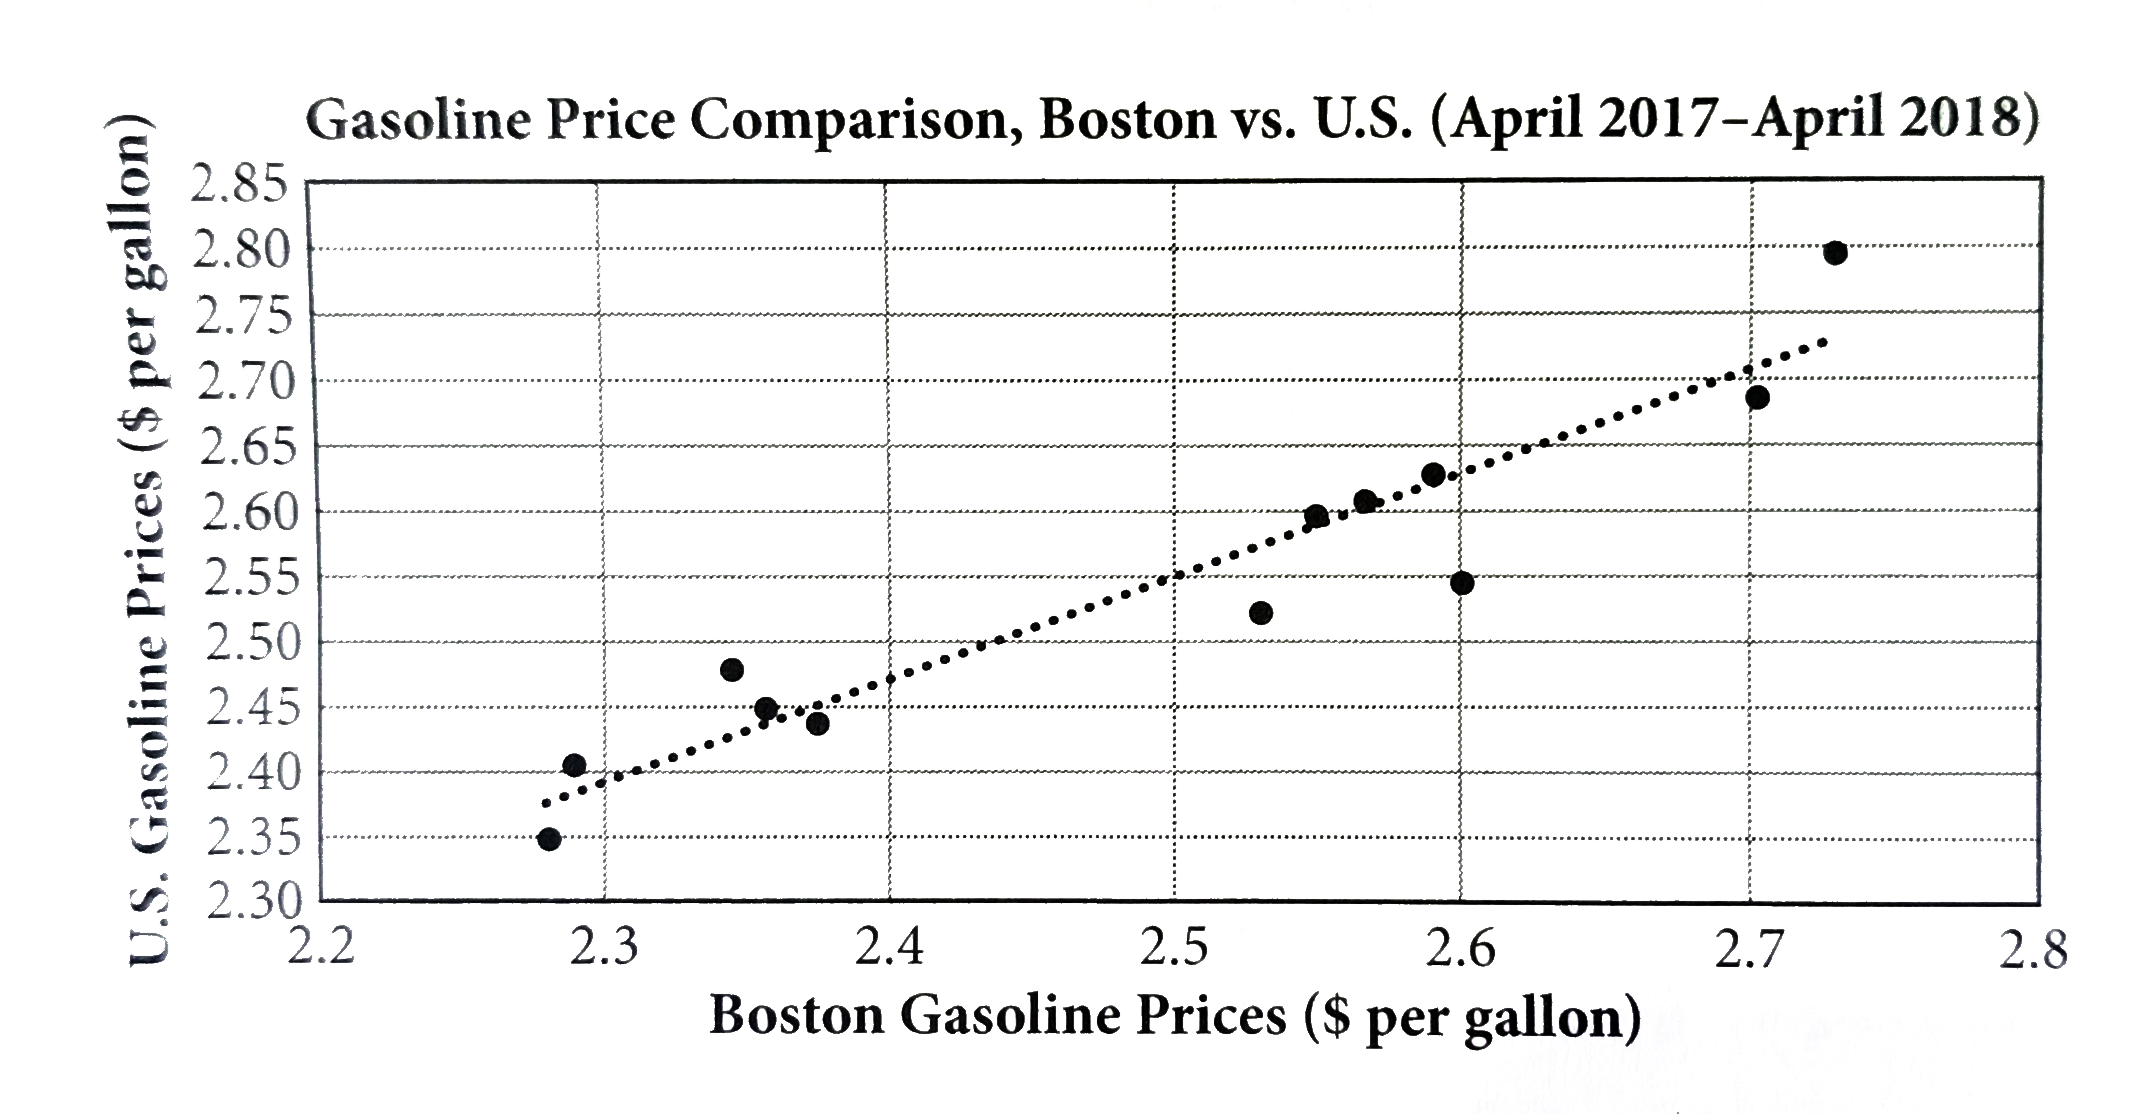 The scatterplot below compares the average gasoline prices I Boston, per gallon, to the average gasoline prices across the United States, per gallon, during a one-year period from 2017 to 2018.       Of the following equations, whihc best modeles the data in the scatterplot ?